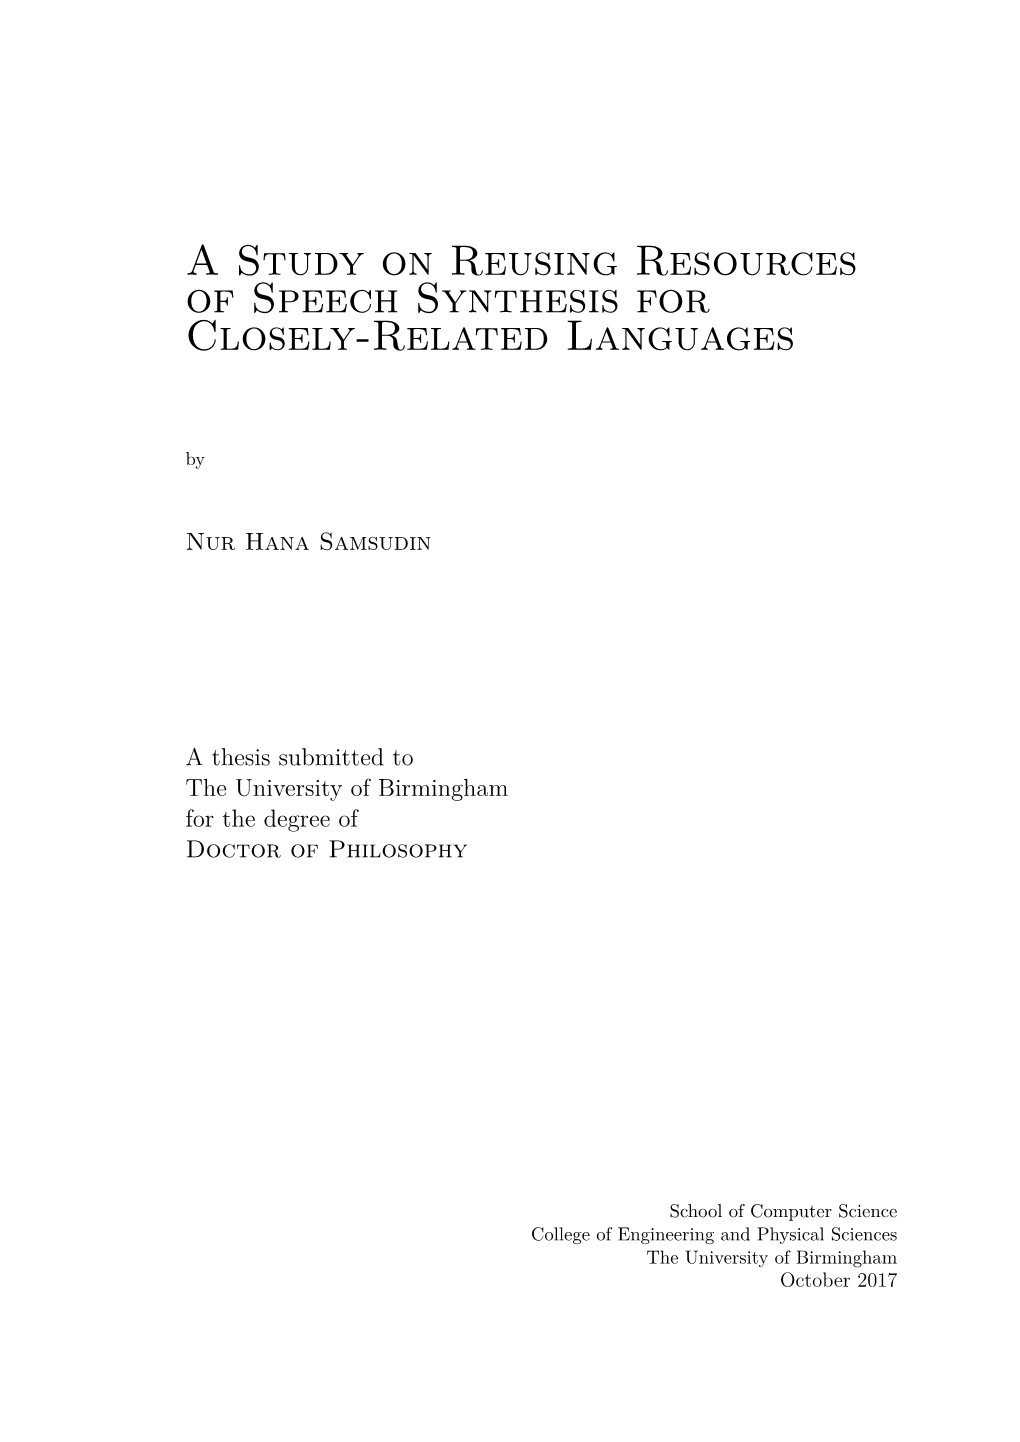 A Study on Reusing Resources of Speech Synthesis for Closely-Related Languages